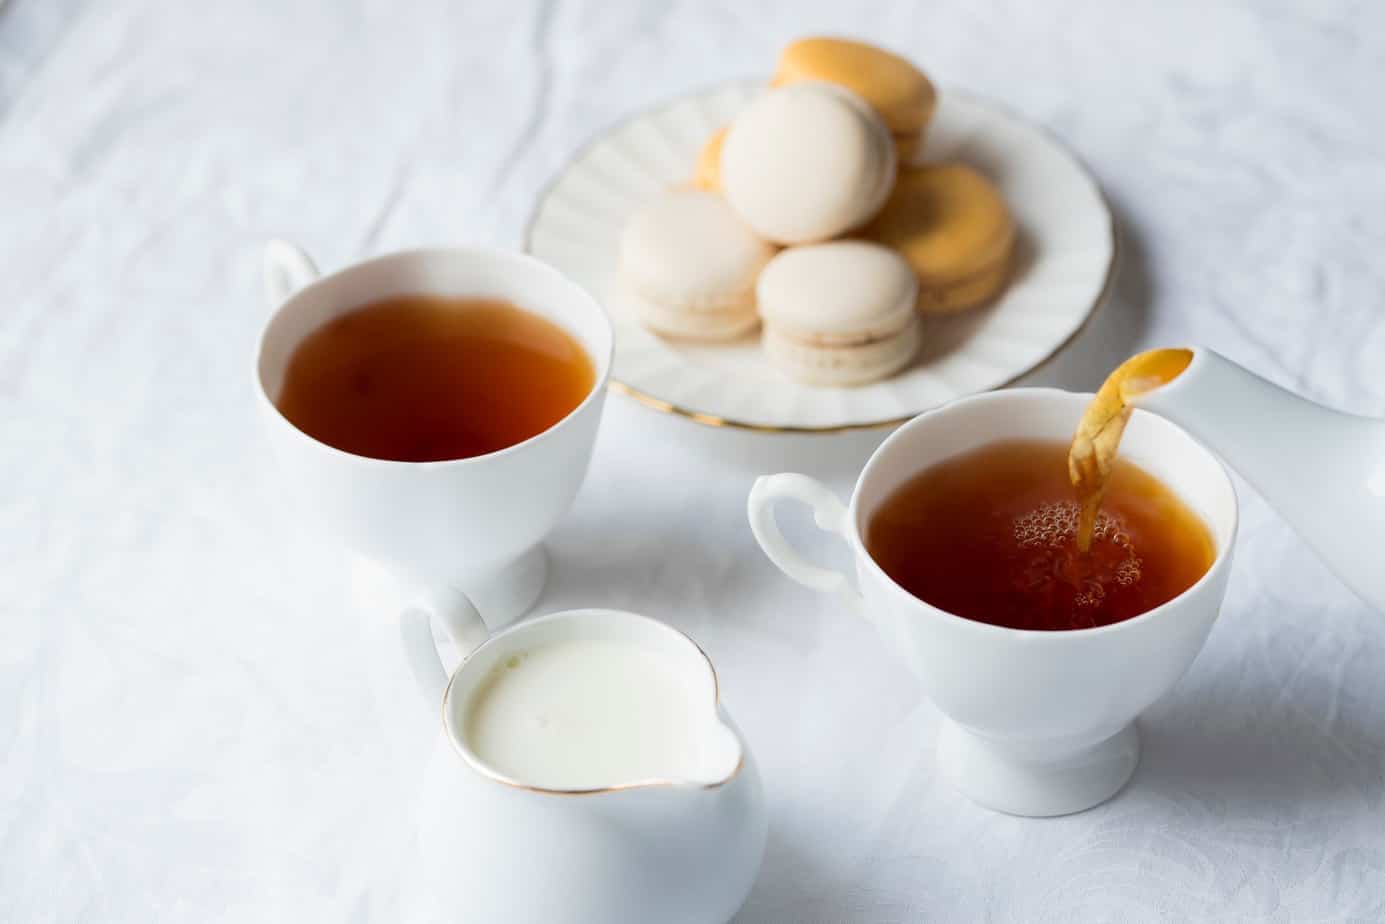 Why Should You Put Milk in Your Tea First?